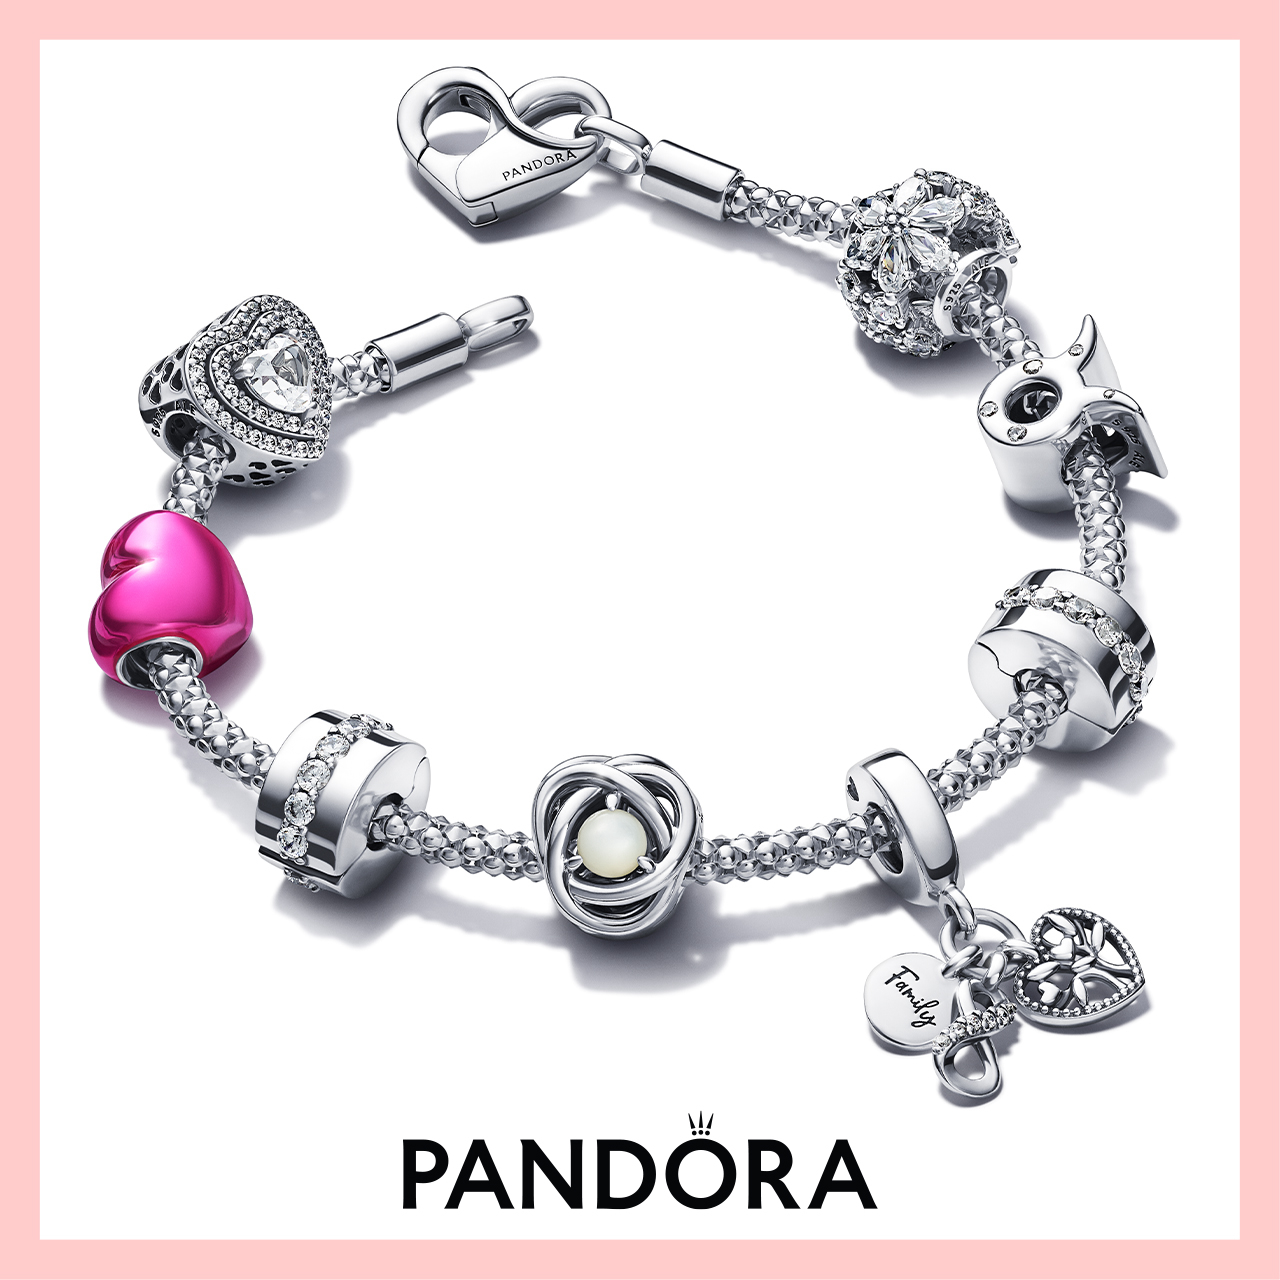 Pandora Campaign 101 The best kinds of gifts are those just because gifts. EN 1280x1280 1